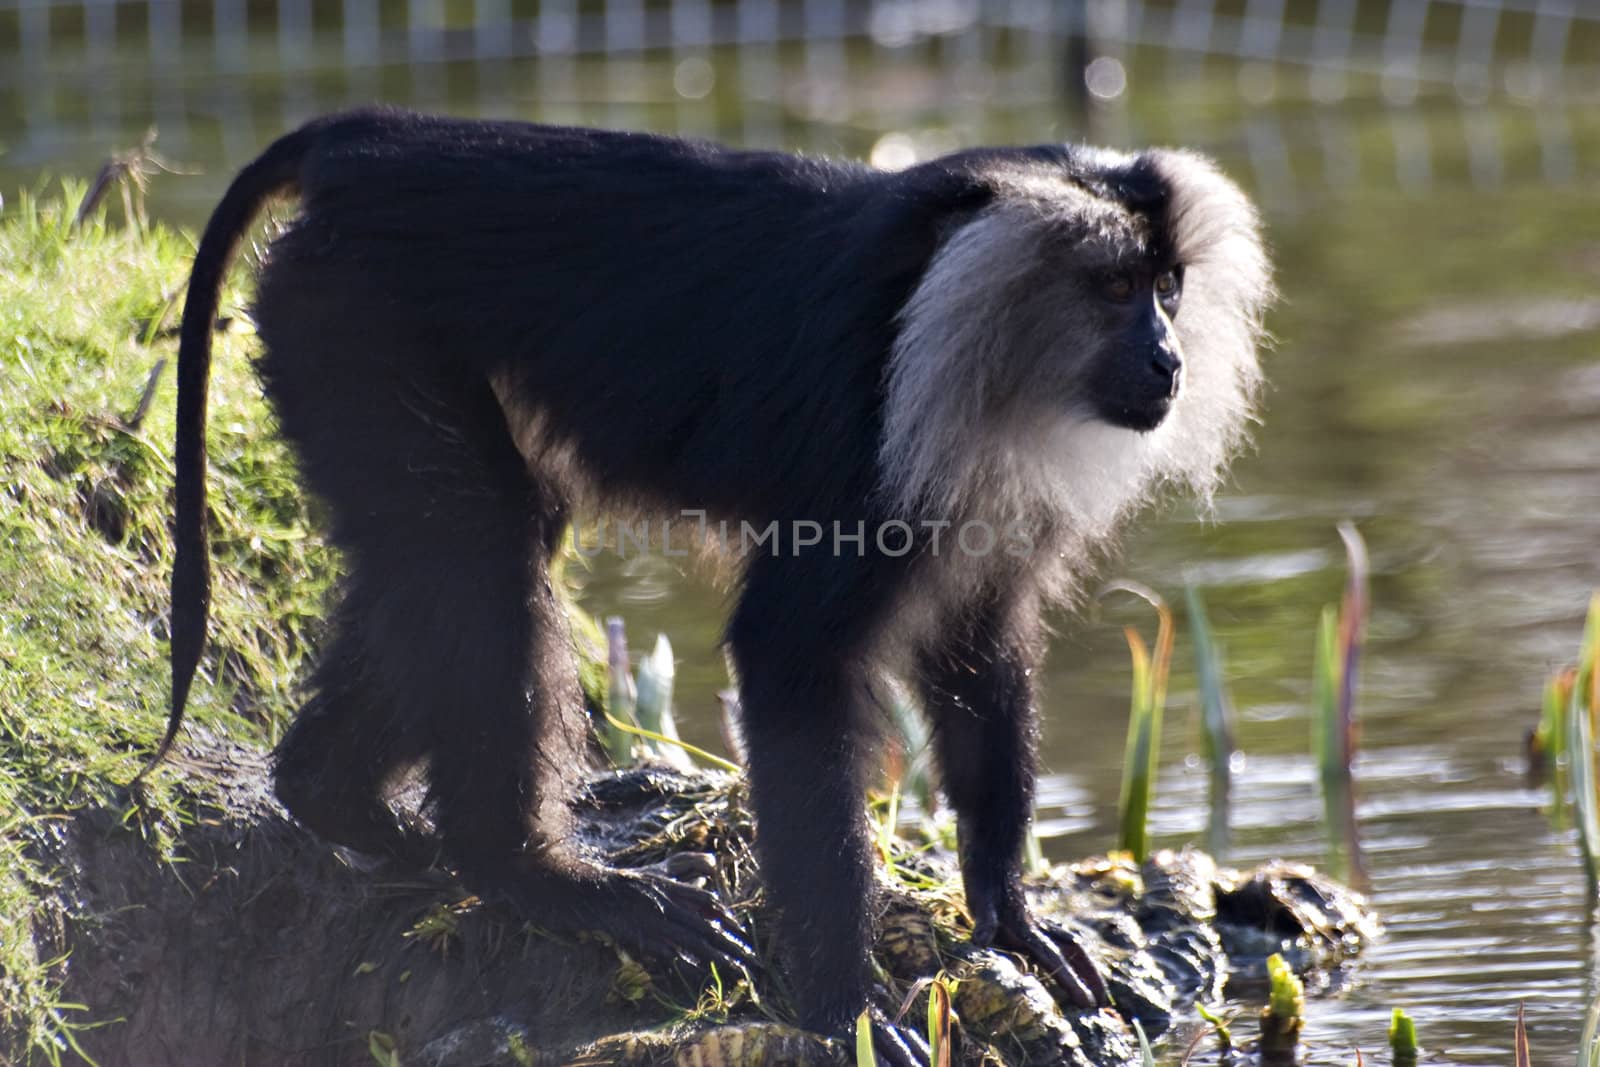 A lion taile macaque (wanderoo Macaca silenus) standing by water